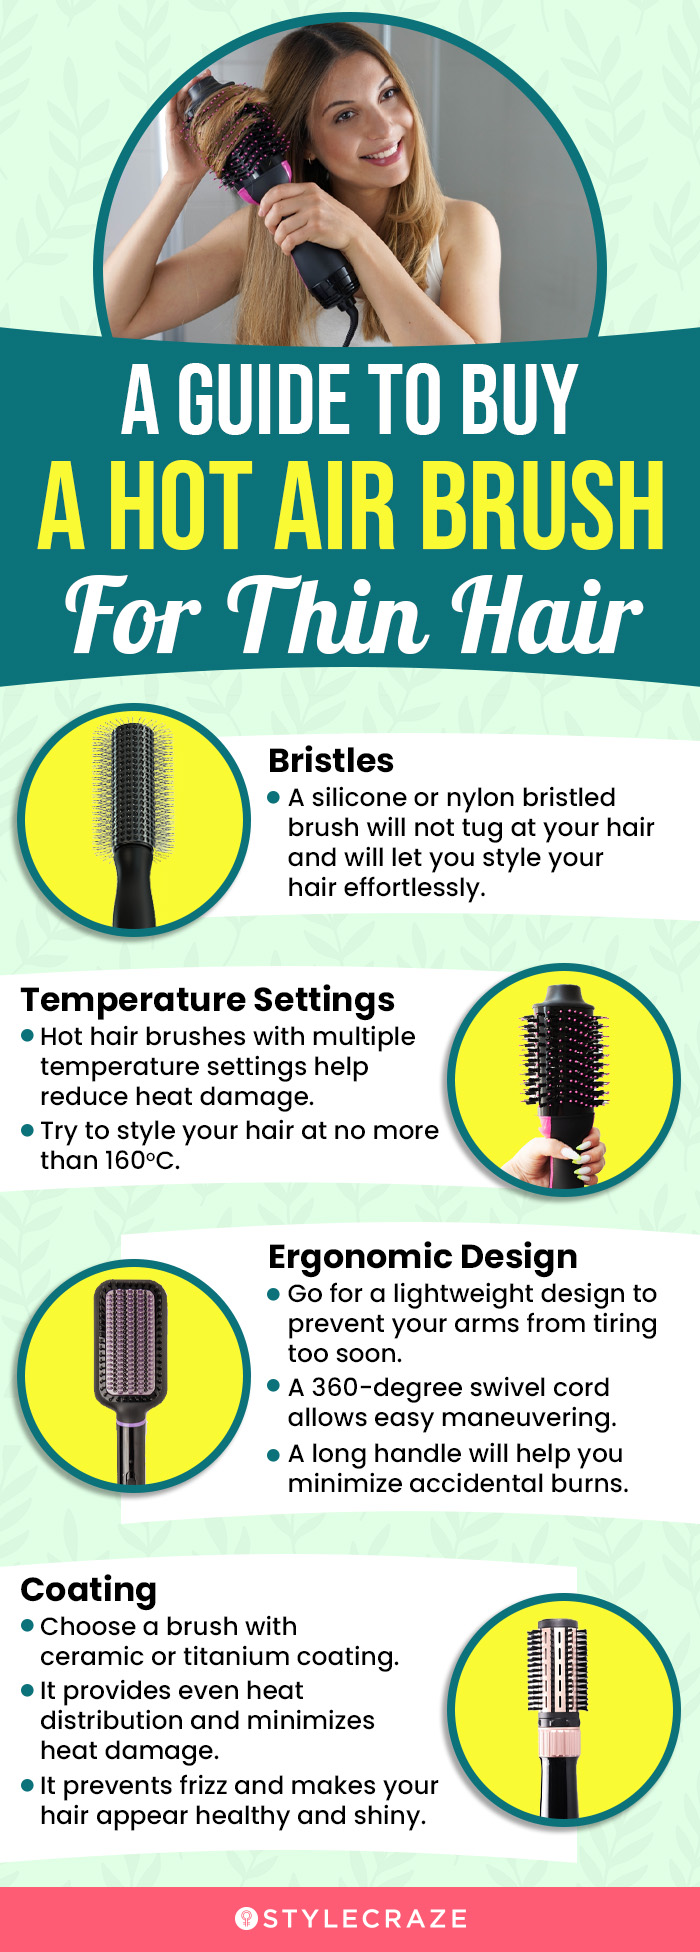 A Guide To Buy A Hot Air Brush For Thin Hair [infographic]